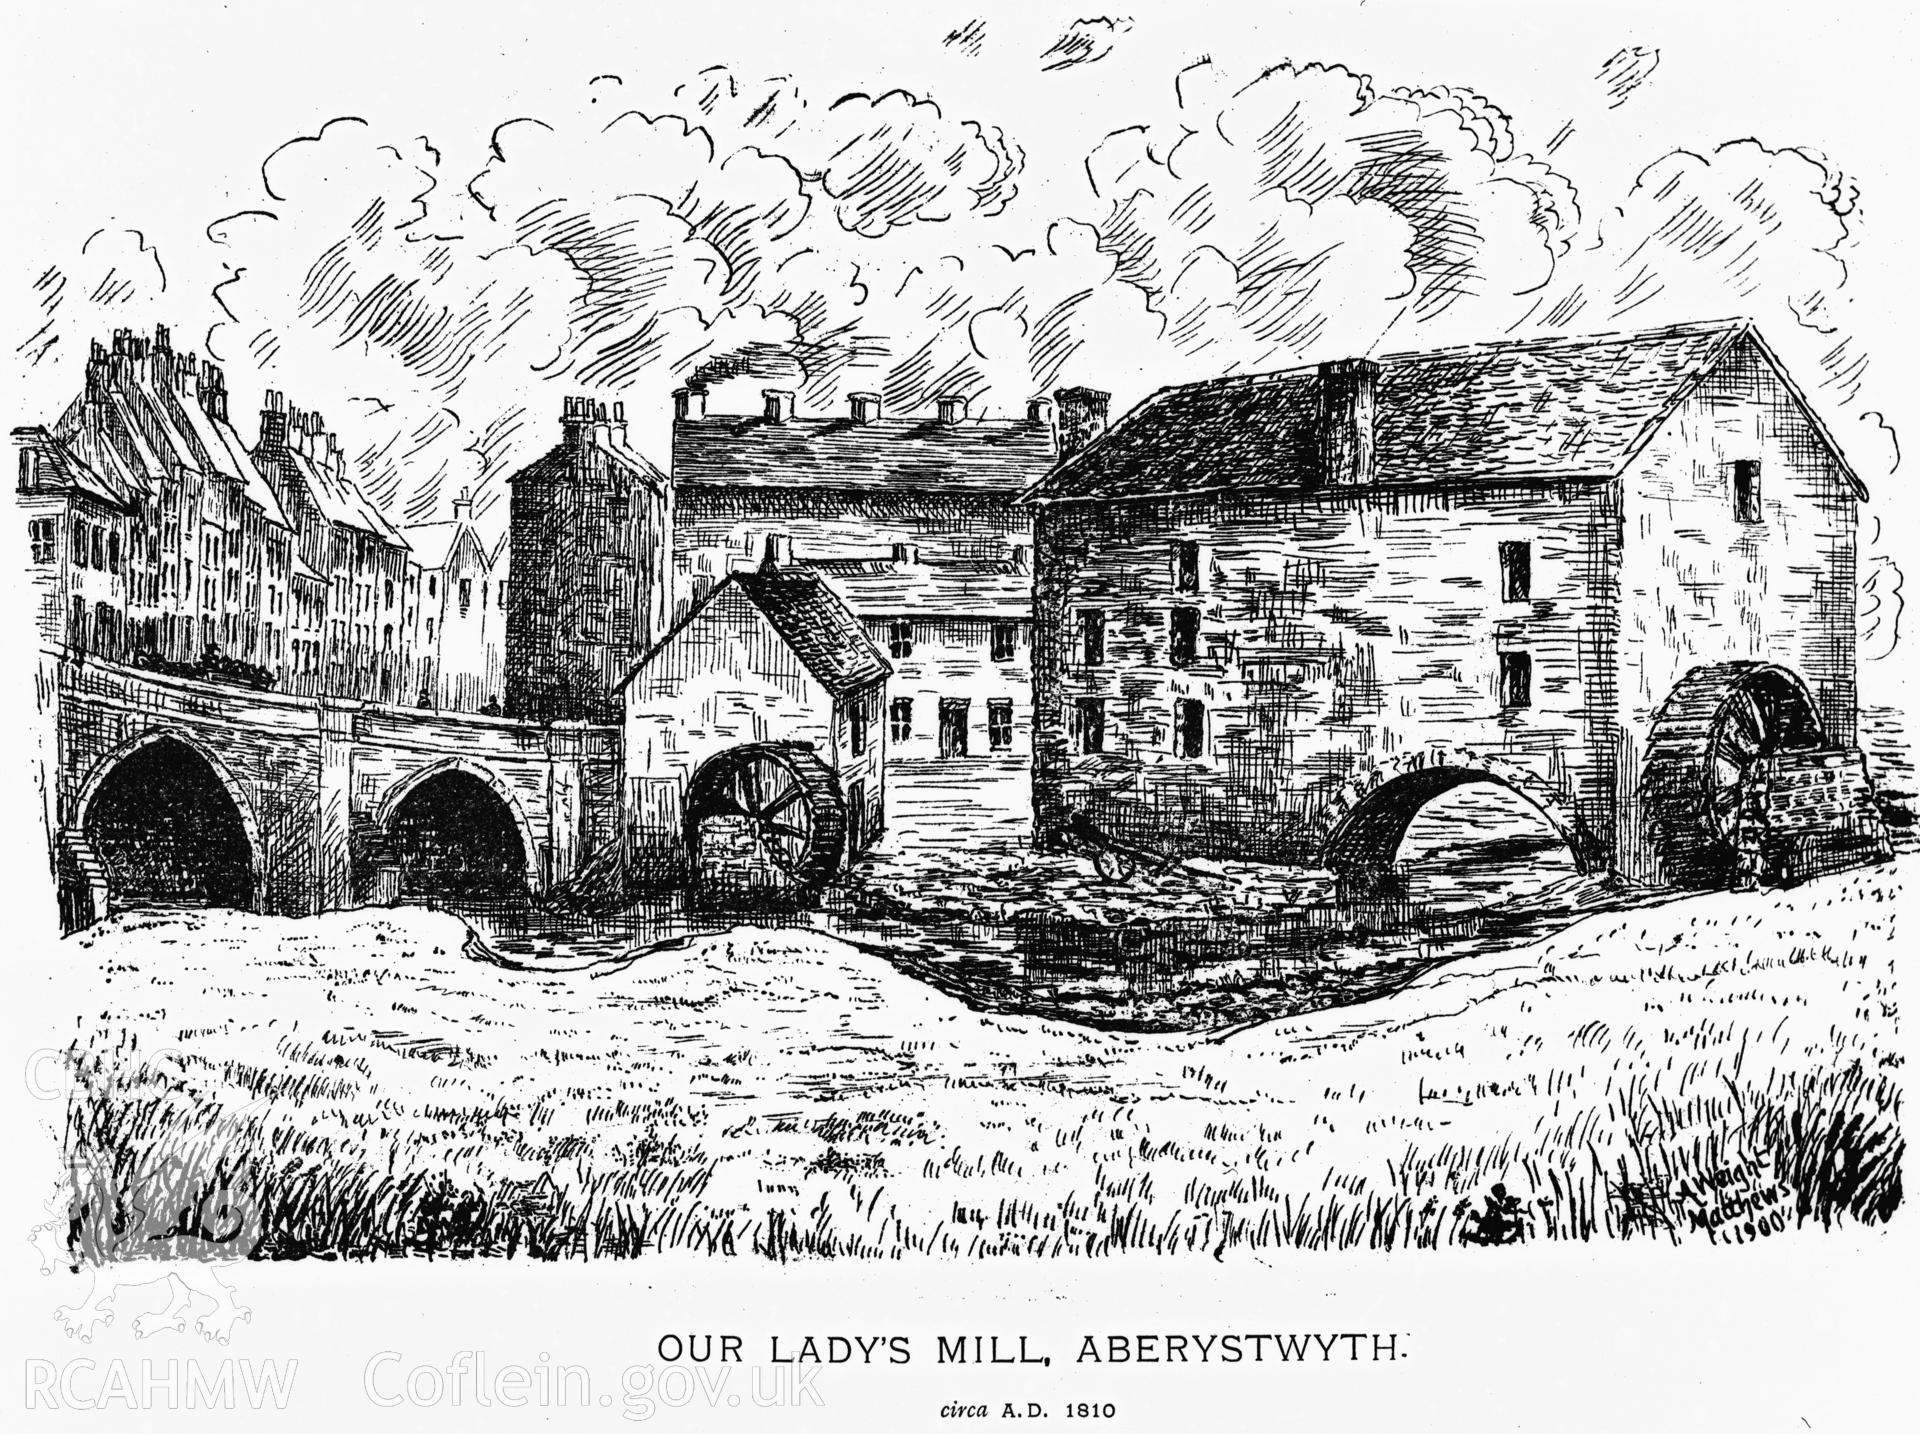 Black and white acetate negative showing an engraving of Our Ladies Mill, Aberystwyth.